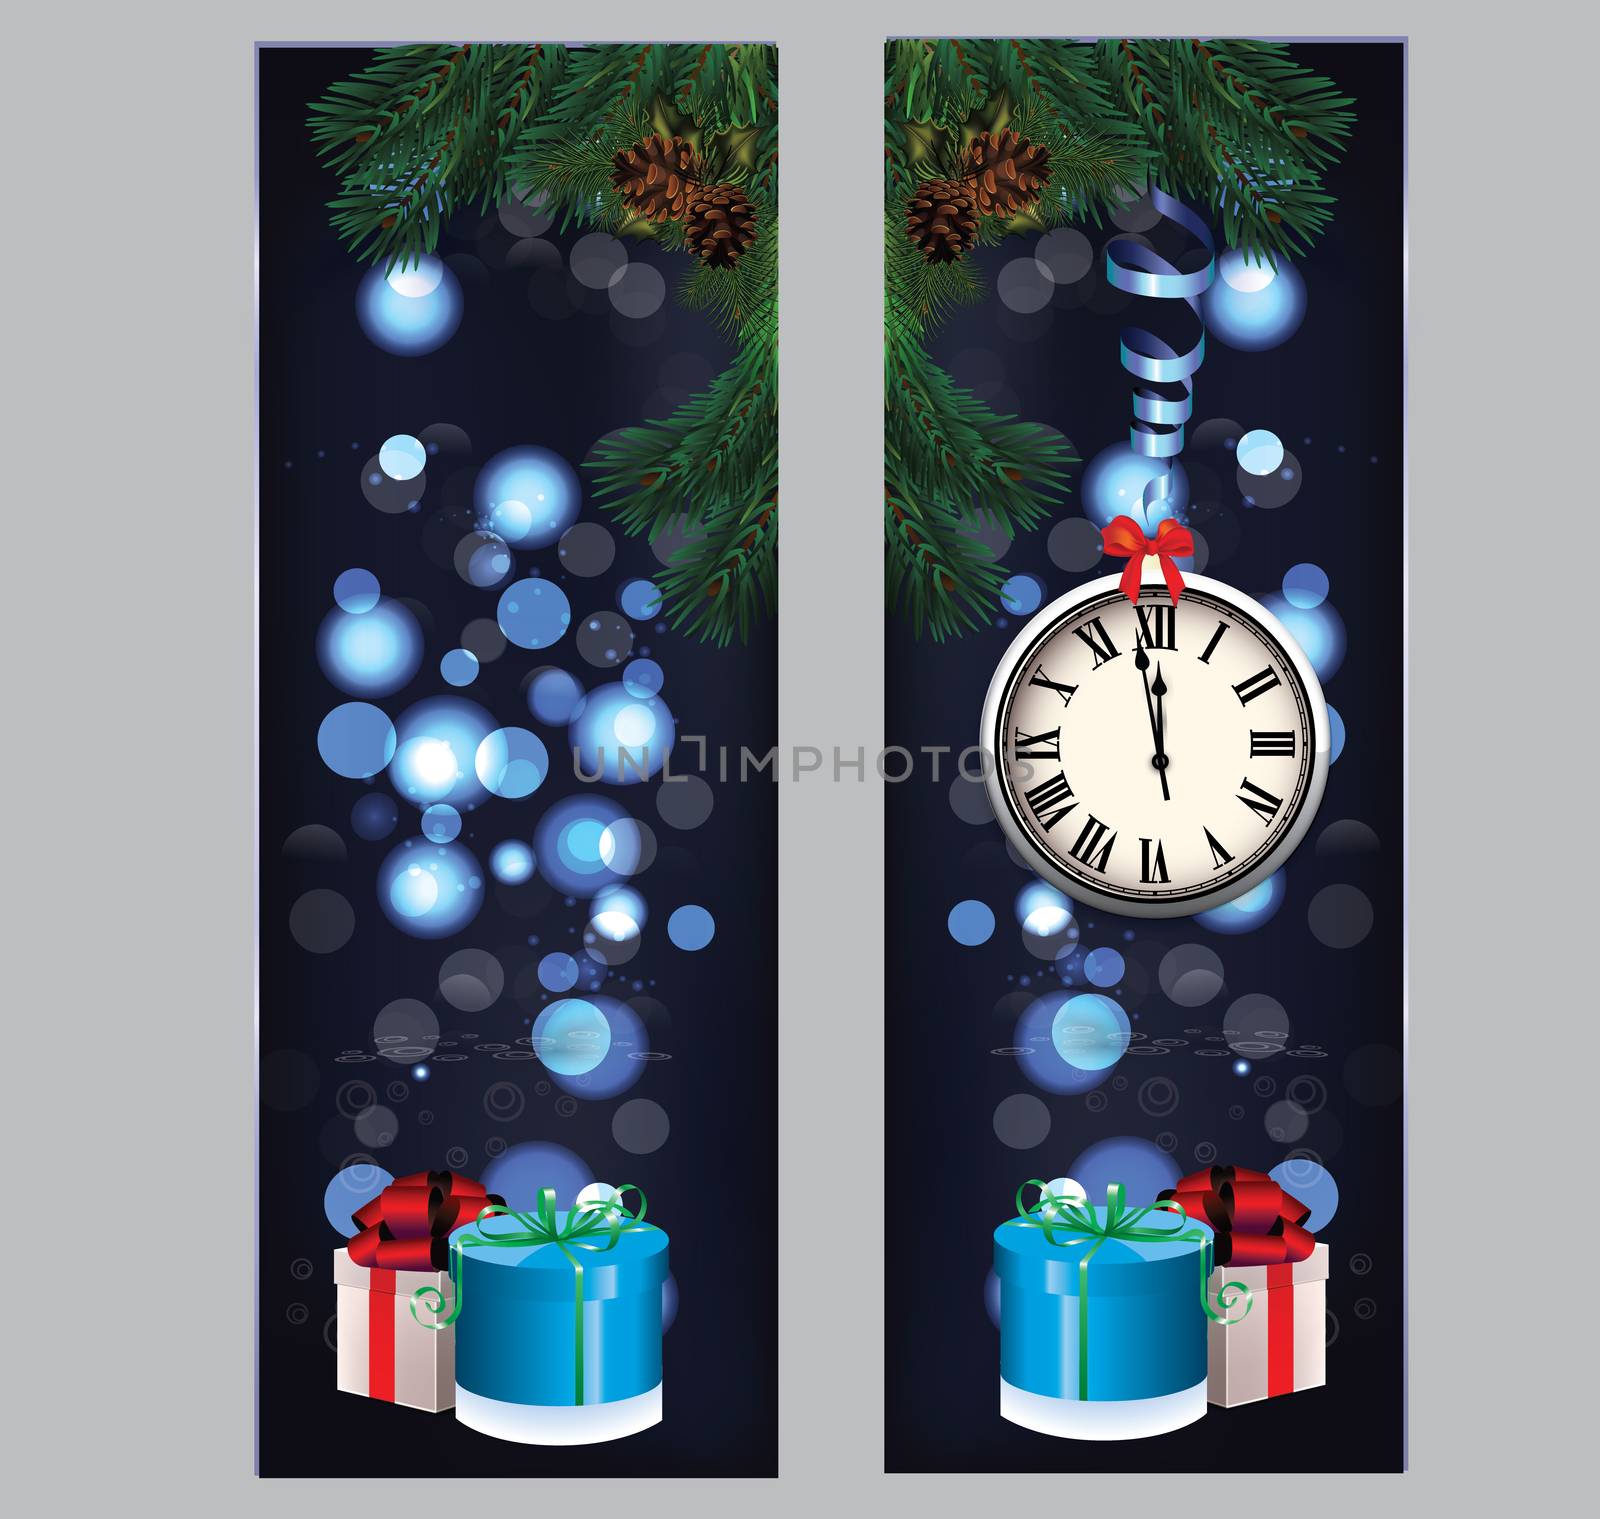 New Year greeting with a clock in the middle of the booklet, gift wrapping and spruce branches